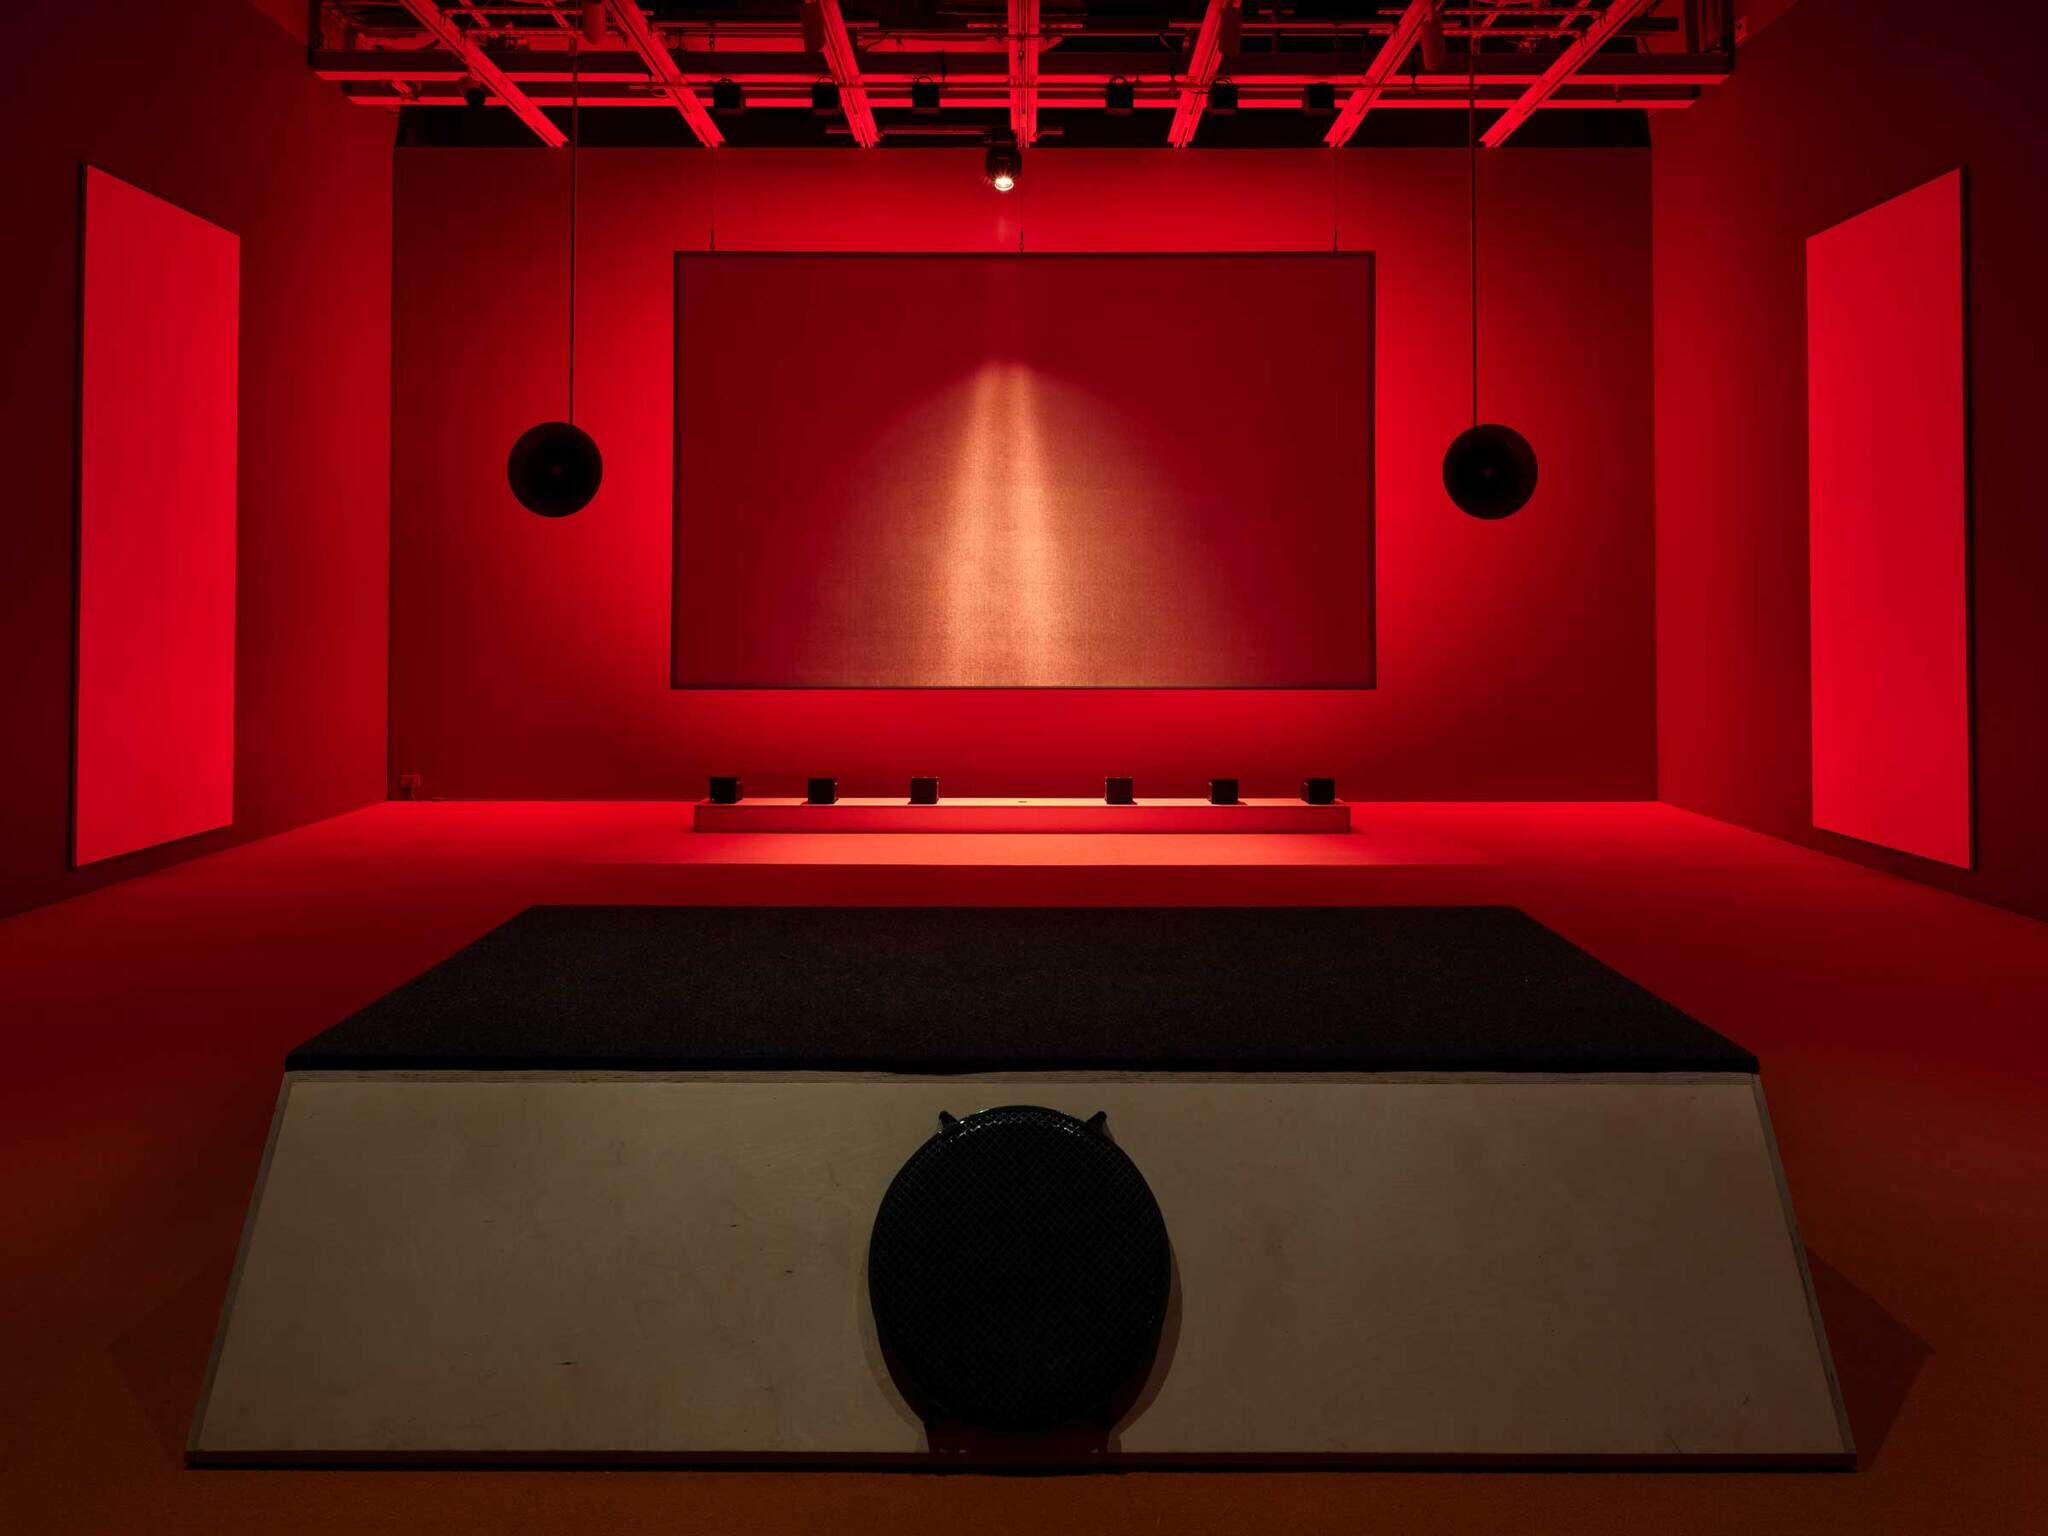 A dimly lit red room with a large screen, speakers, and a stage, evoking a moody cinematic atmosphere.